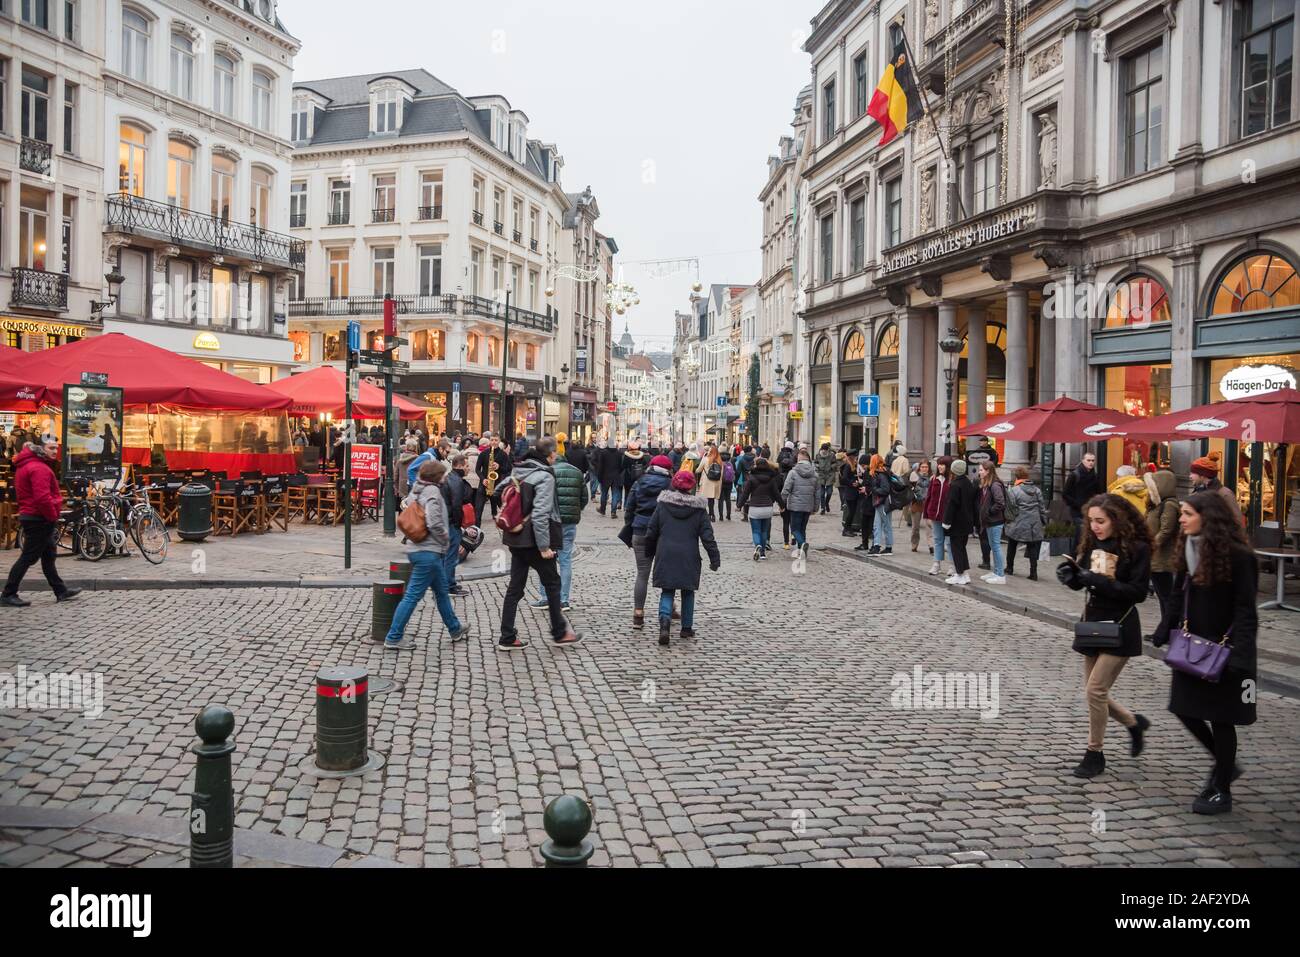 People strolling along a cobblestone street decorated for Christmas in the historic Brussels old town Stock Photo